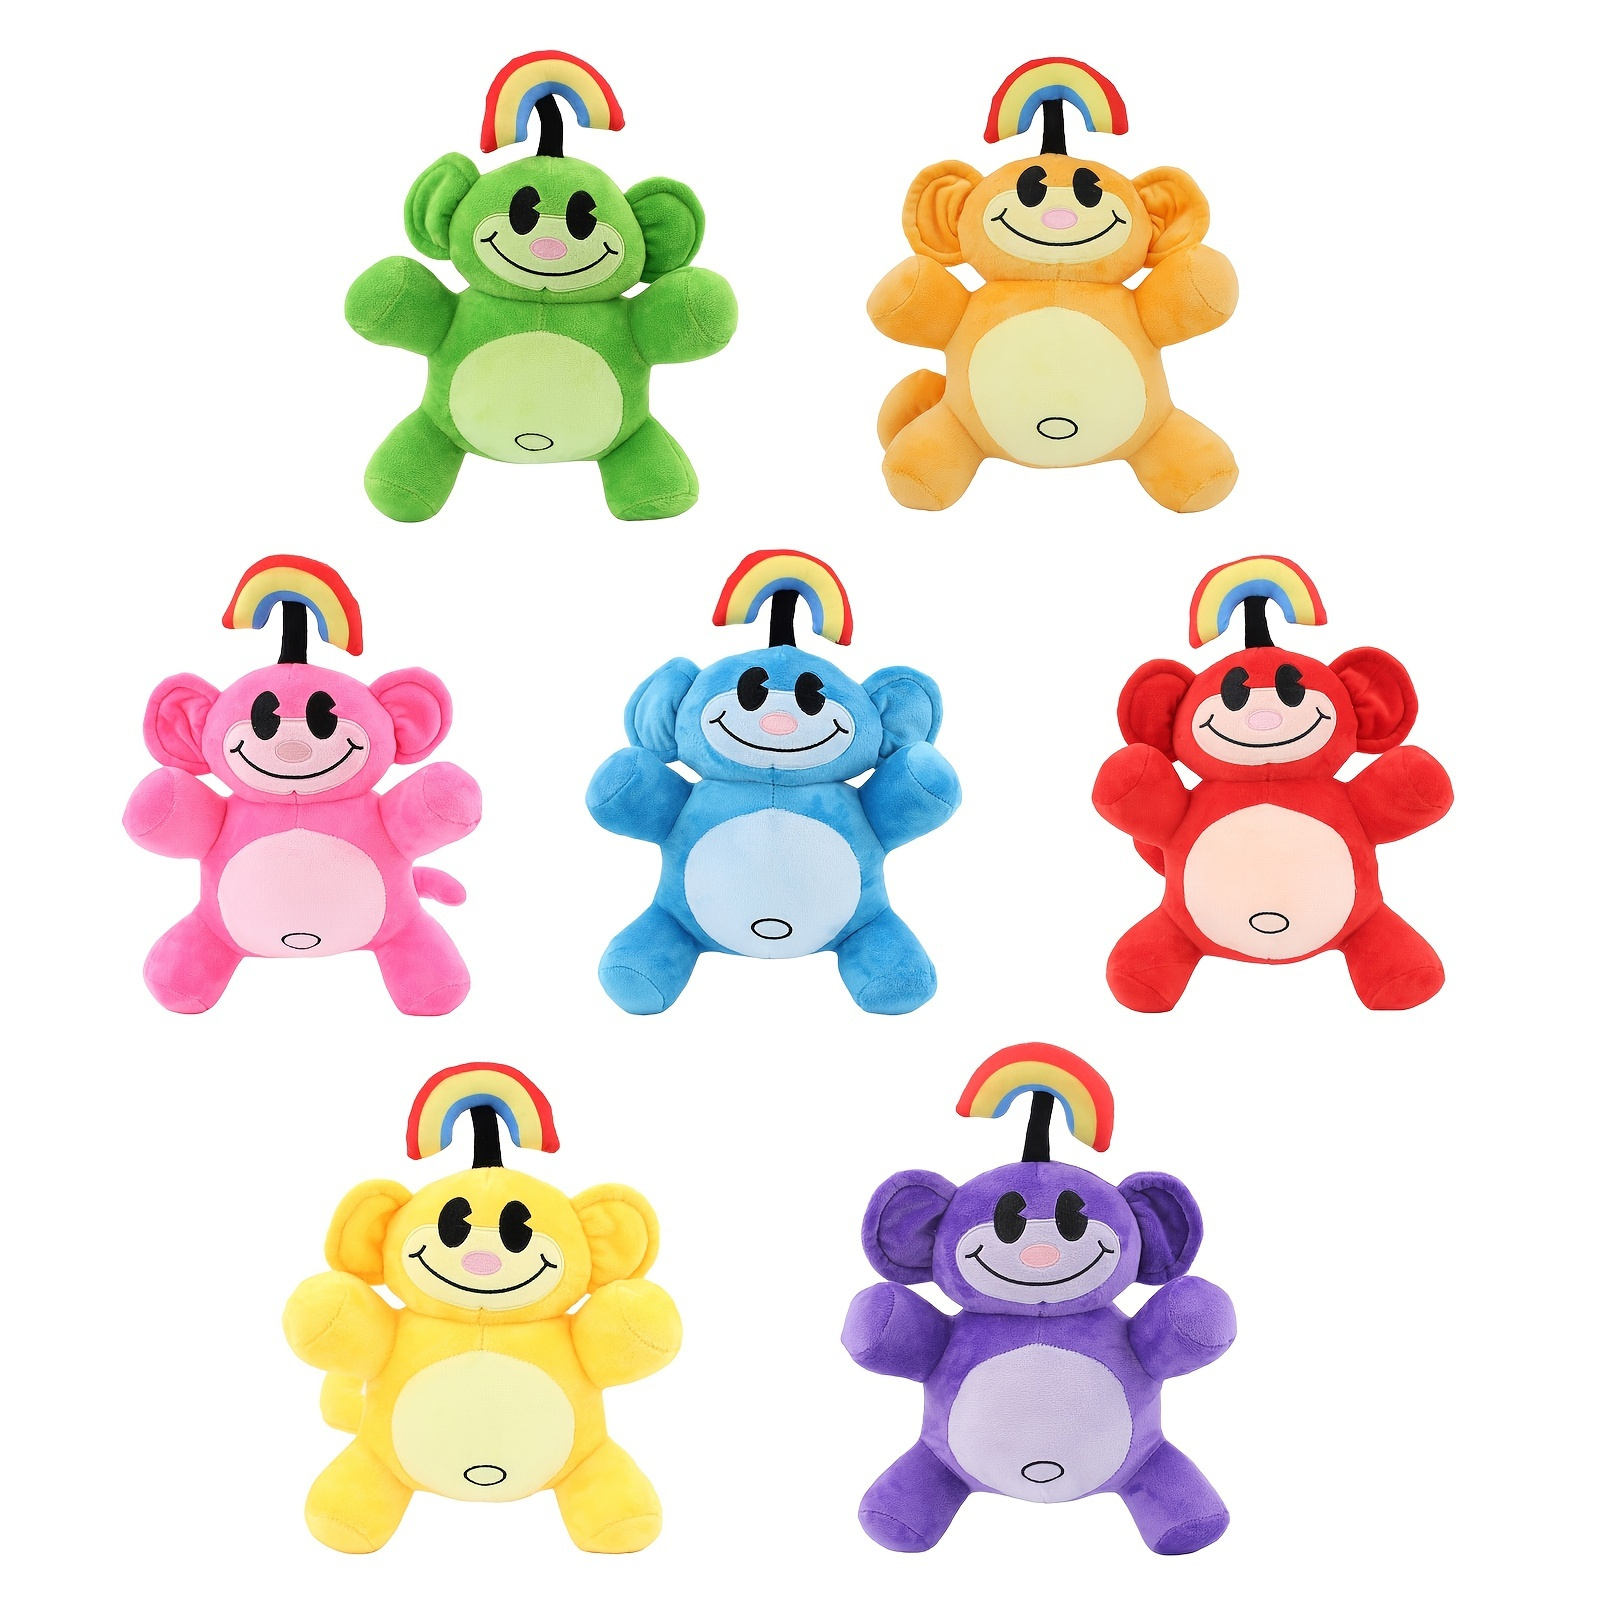 Red Rainbow friends plush the best rainbow friends roblox plush, Best Gift  for Boys and Girls for Halloween Thanksgiving and Game Lovers